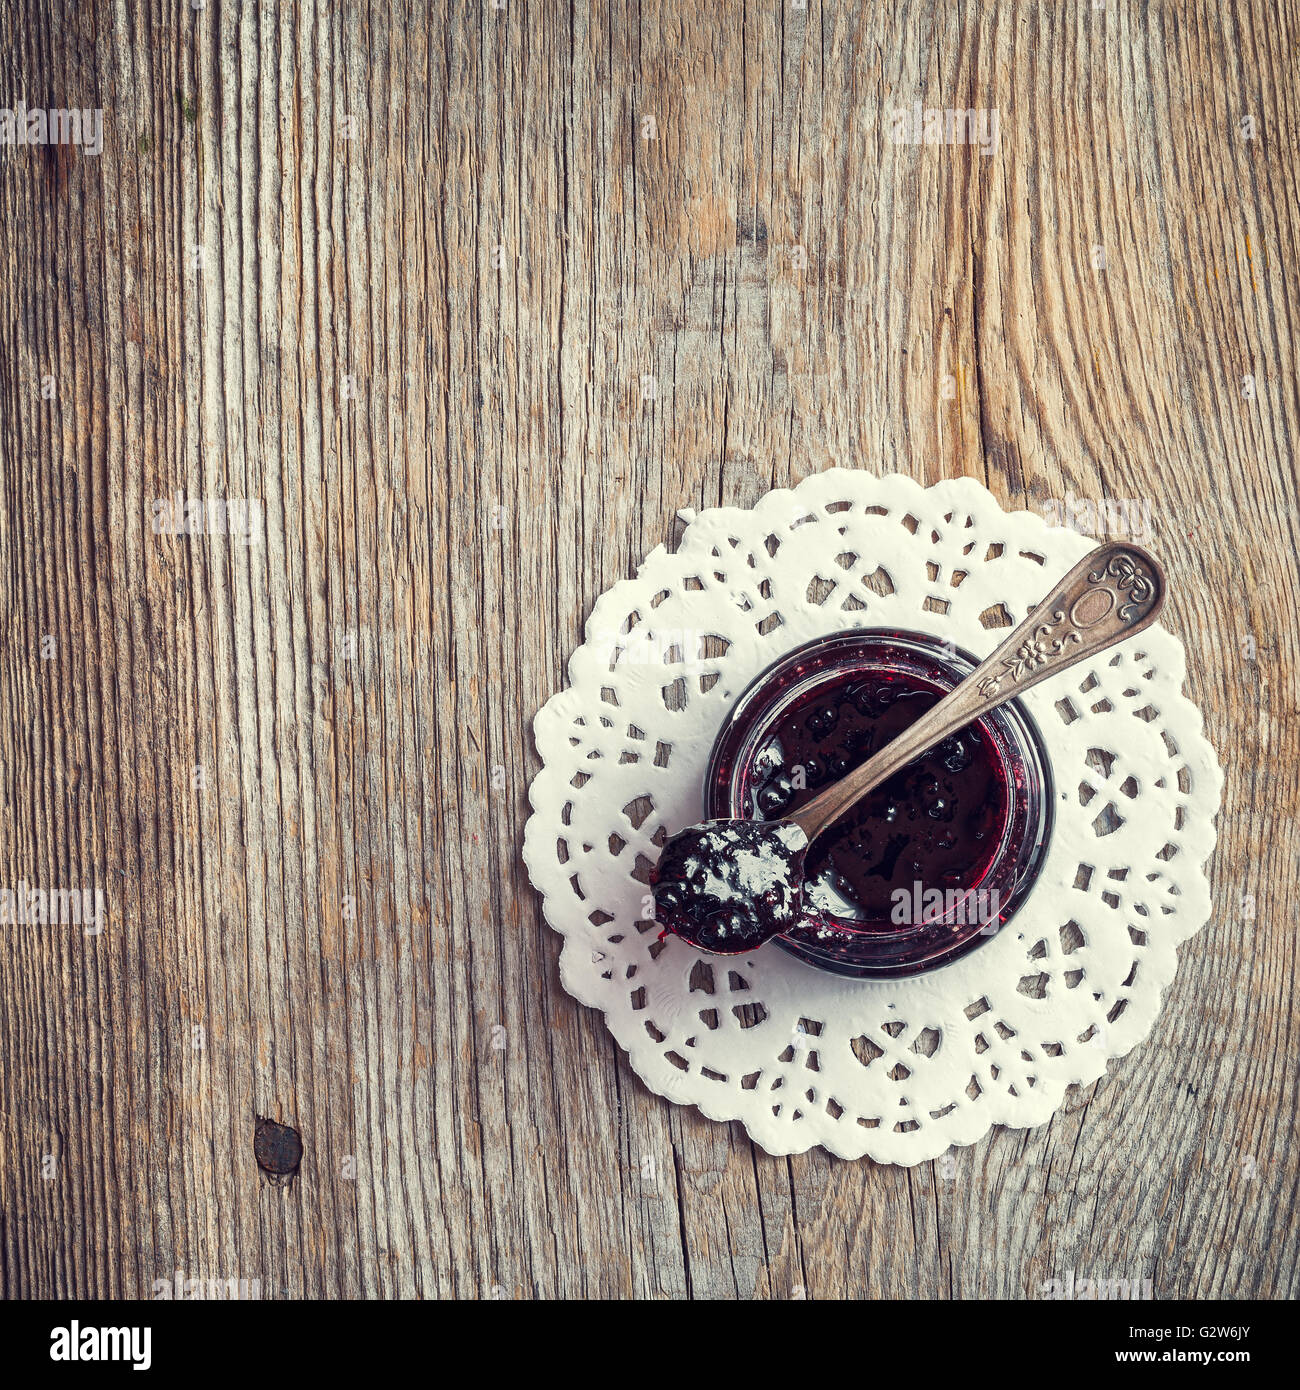 Jar of jam with spoon on old wooden table. Top view. Stock Photo